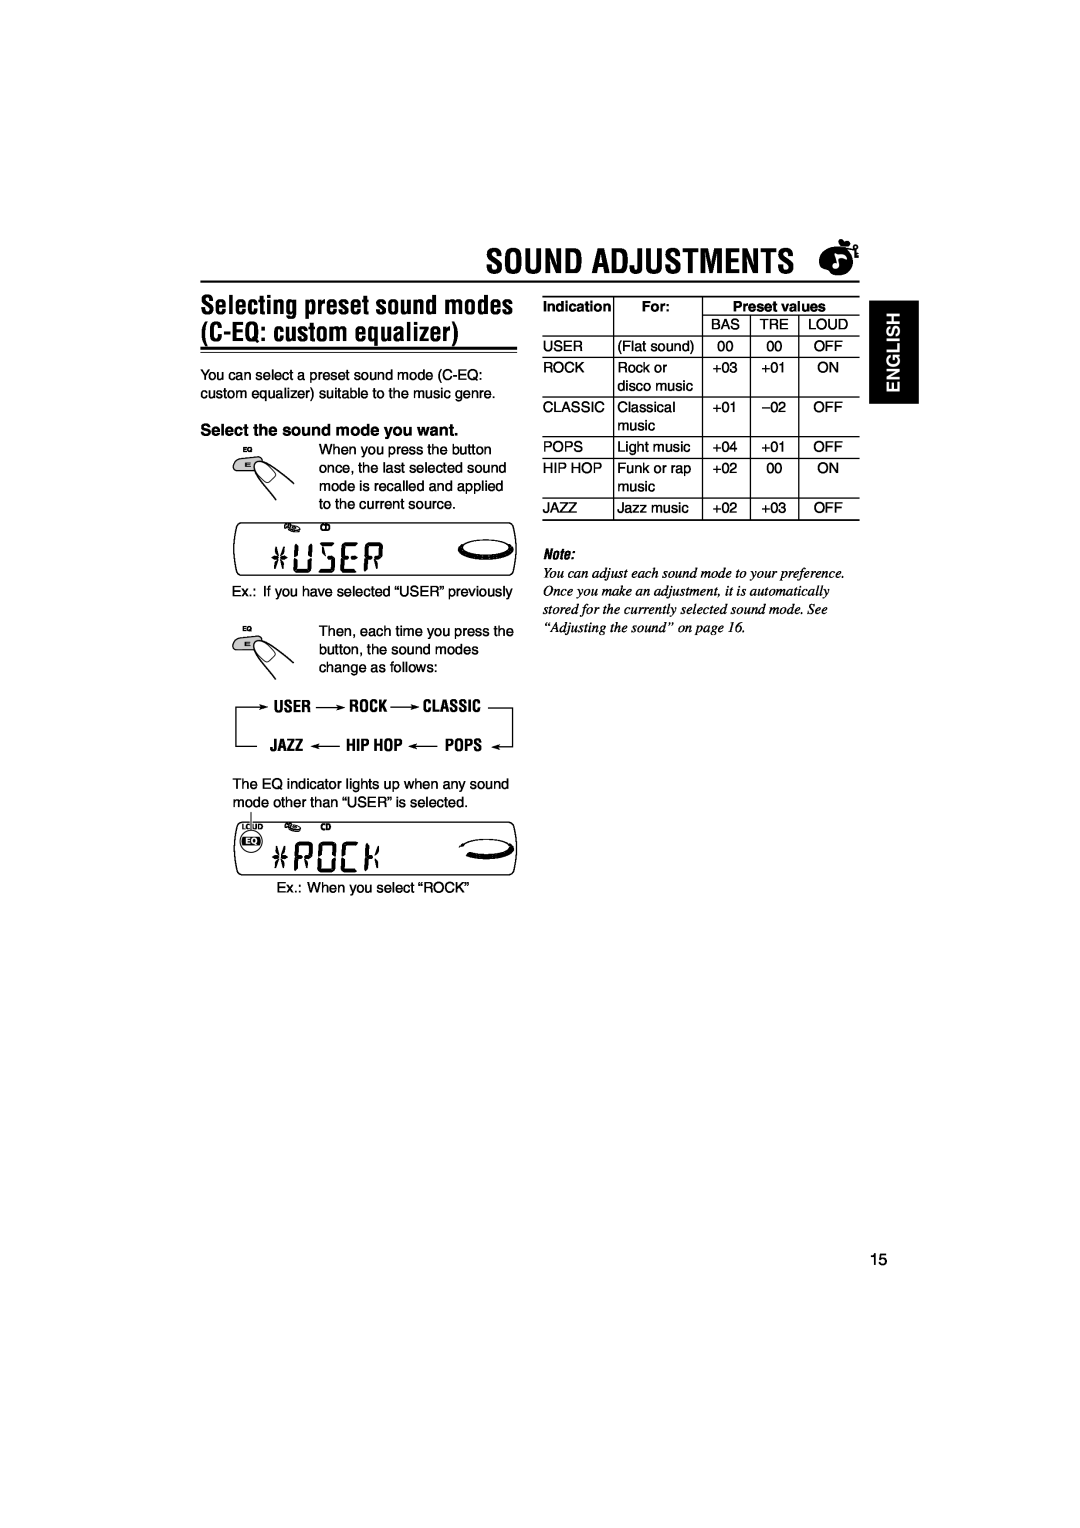 JVC KD-S795 Sound Adjustments, English, Select the sound mode you want, User Rock Classic Jazz Hip Hop Pops, Preset values 